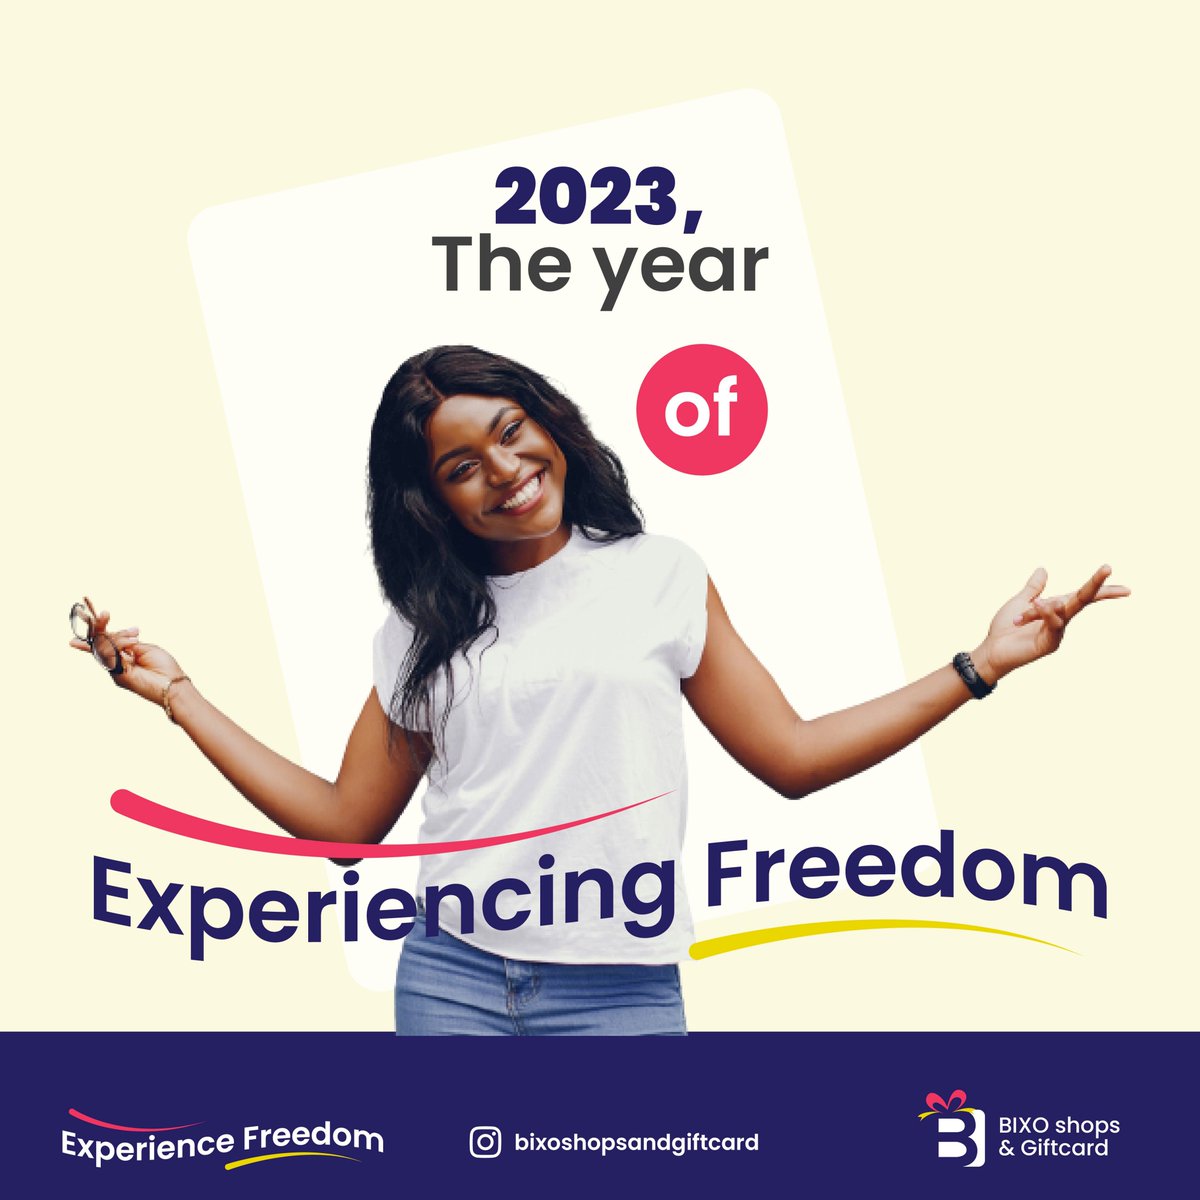 If you still haven't decided your new year's resolution, here is your cue. 2023 is the year to
experience freedom with transactions, shopping and
gifting. It's the year to #ExperienceFreedom Click the
link on our bio for more!
#BSGC #Mastercard #prepaidcard #prepaidcards
#Fintech